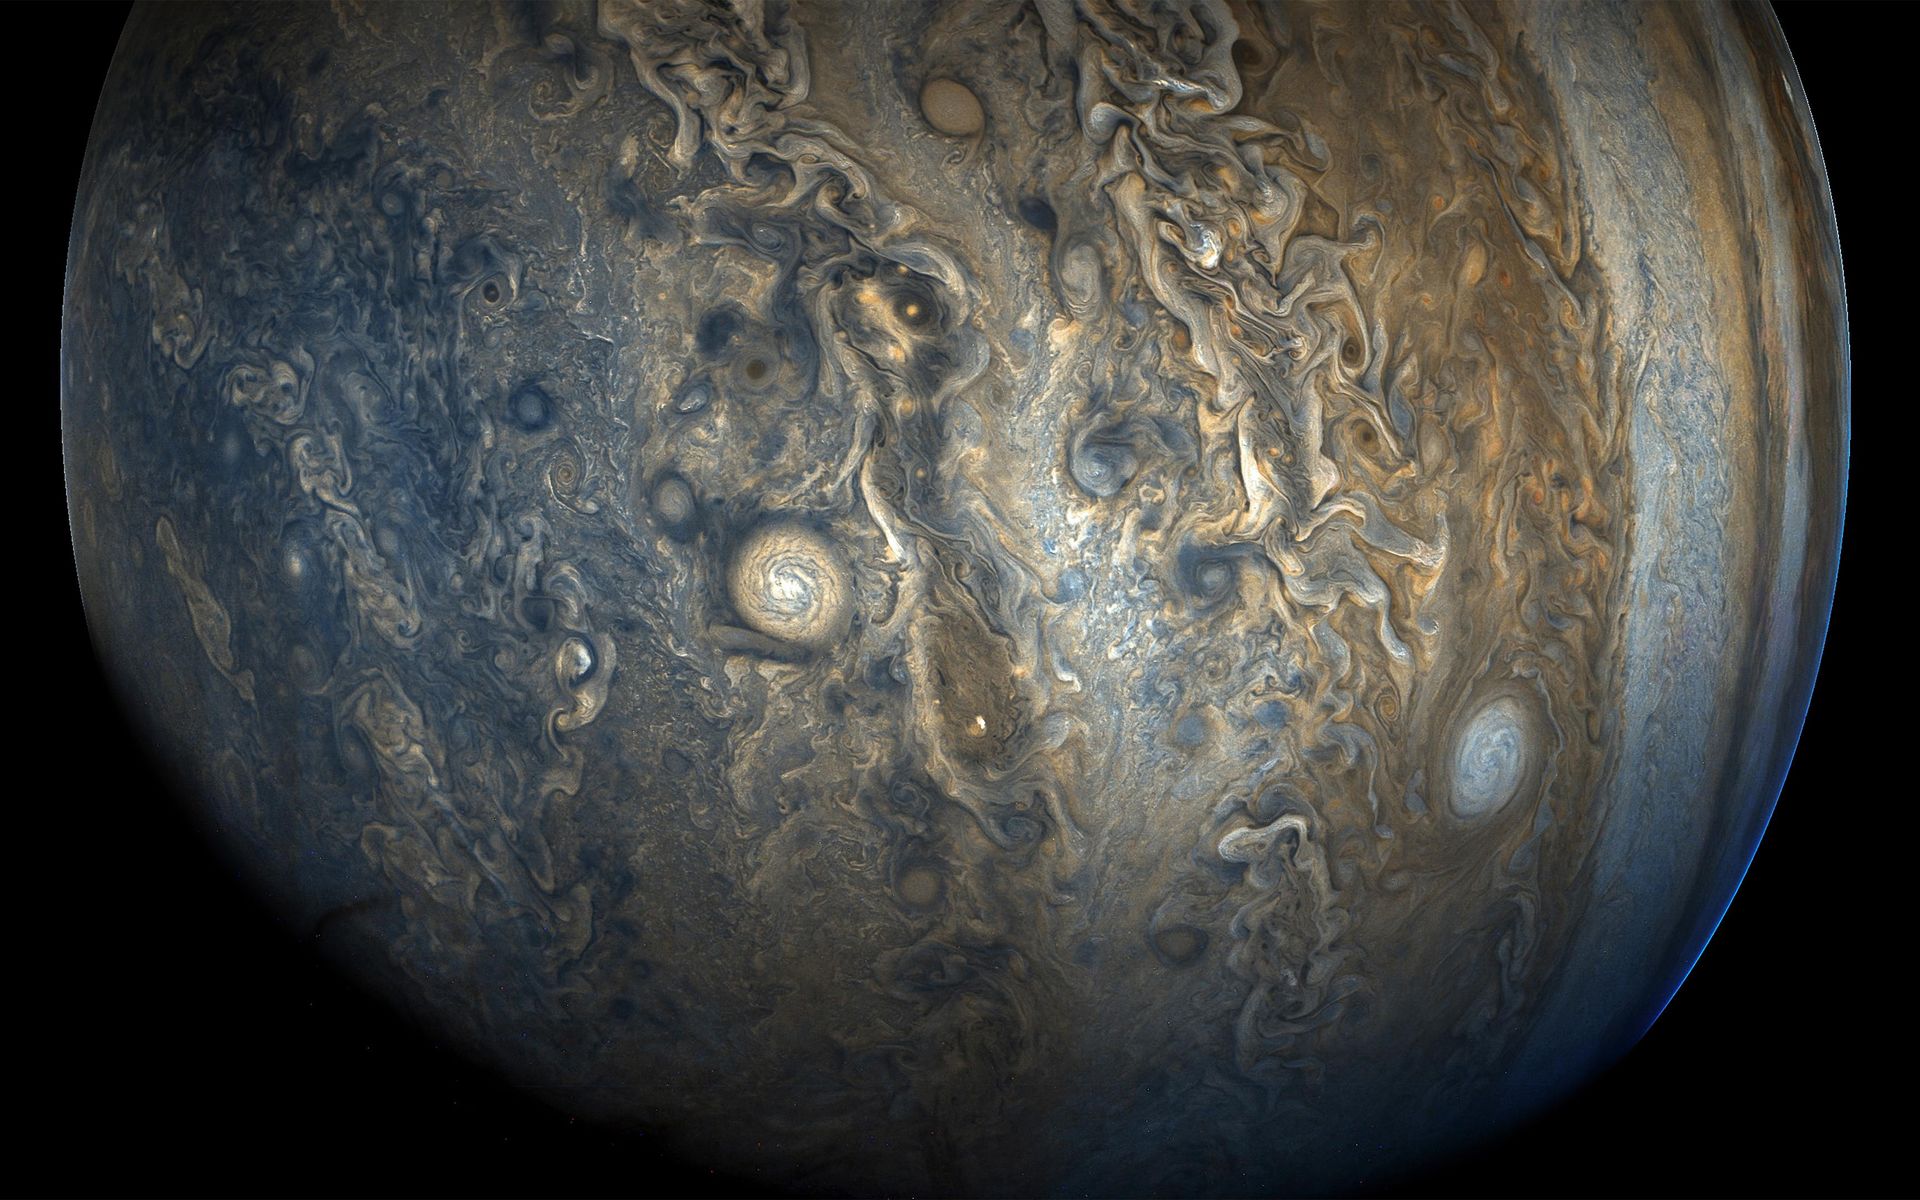 10 Things for Jan. 8: Images for Your Computer or Phone Wallpaper – NASA  Solar System Exploration